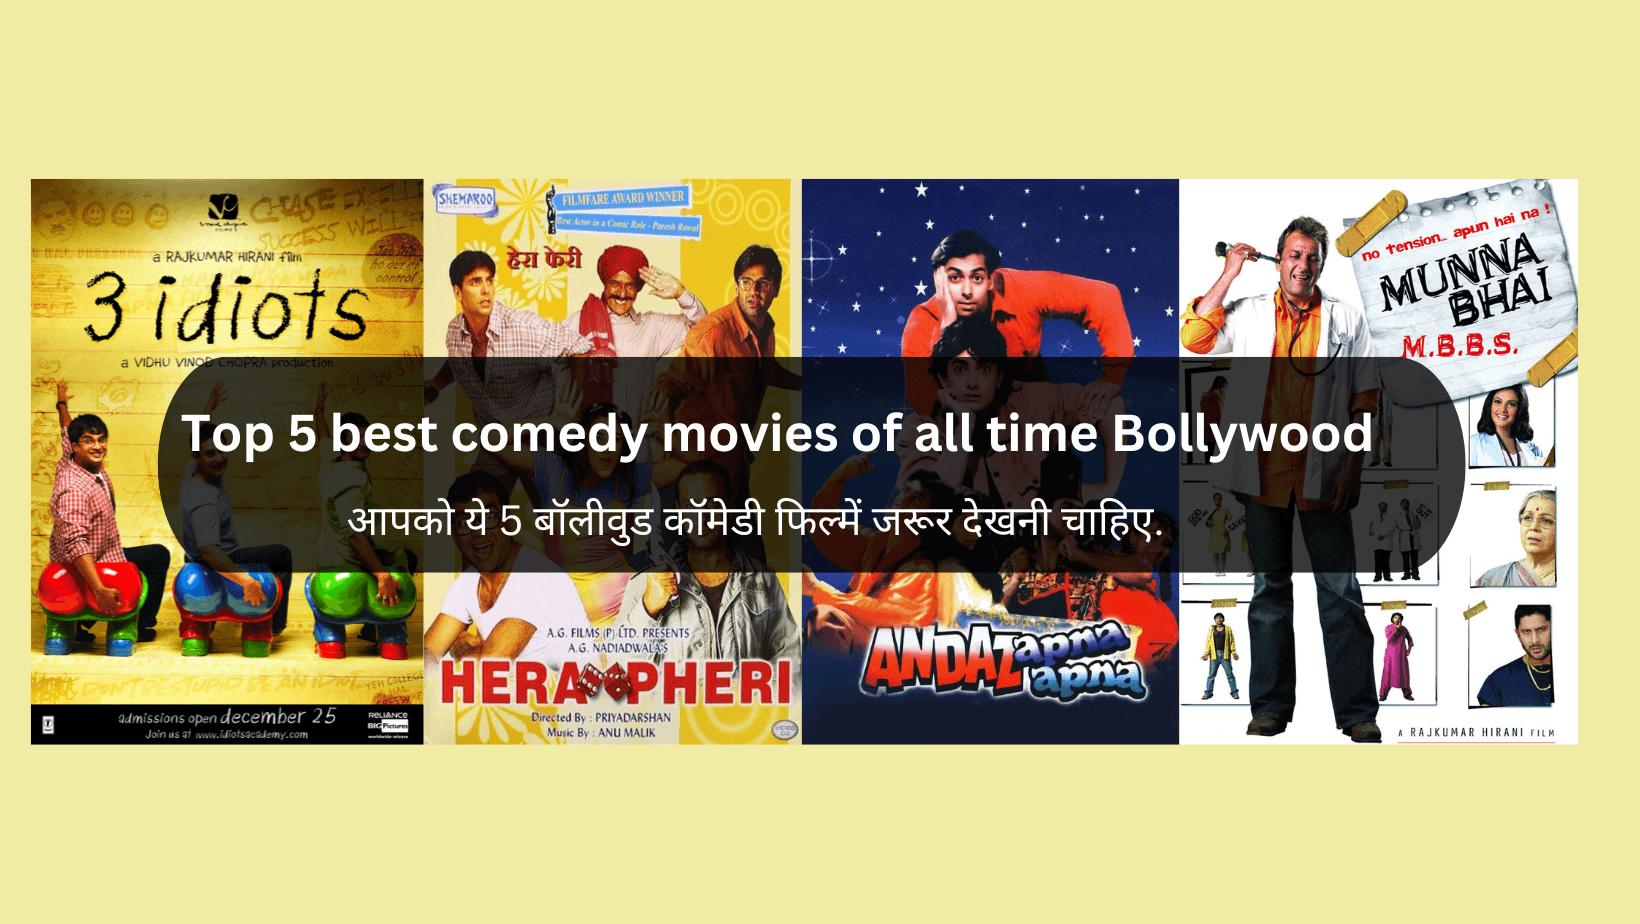 Top 5 best comedy movies of all time Bollywood